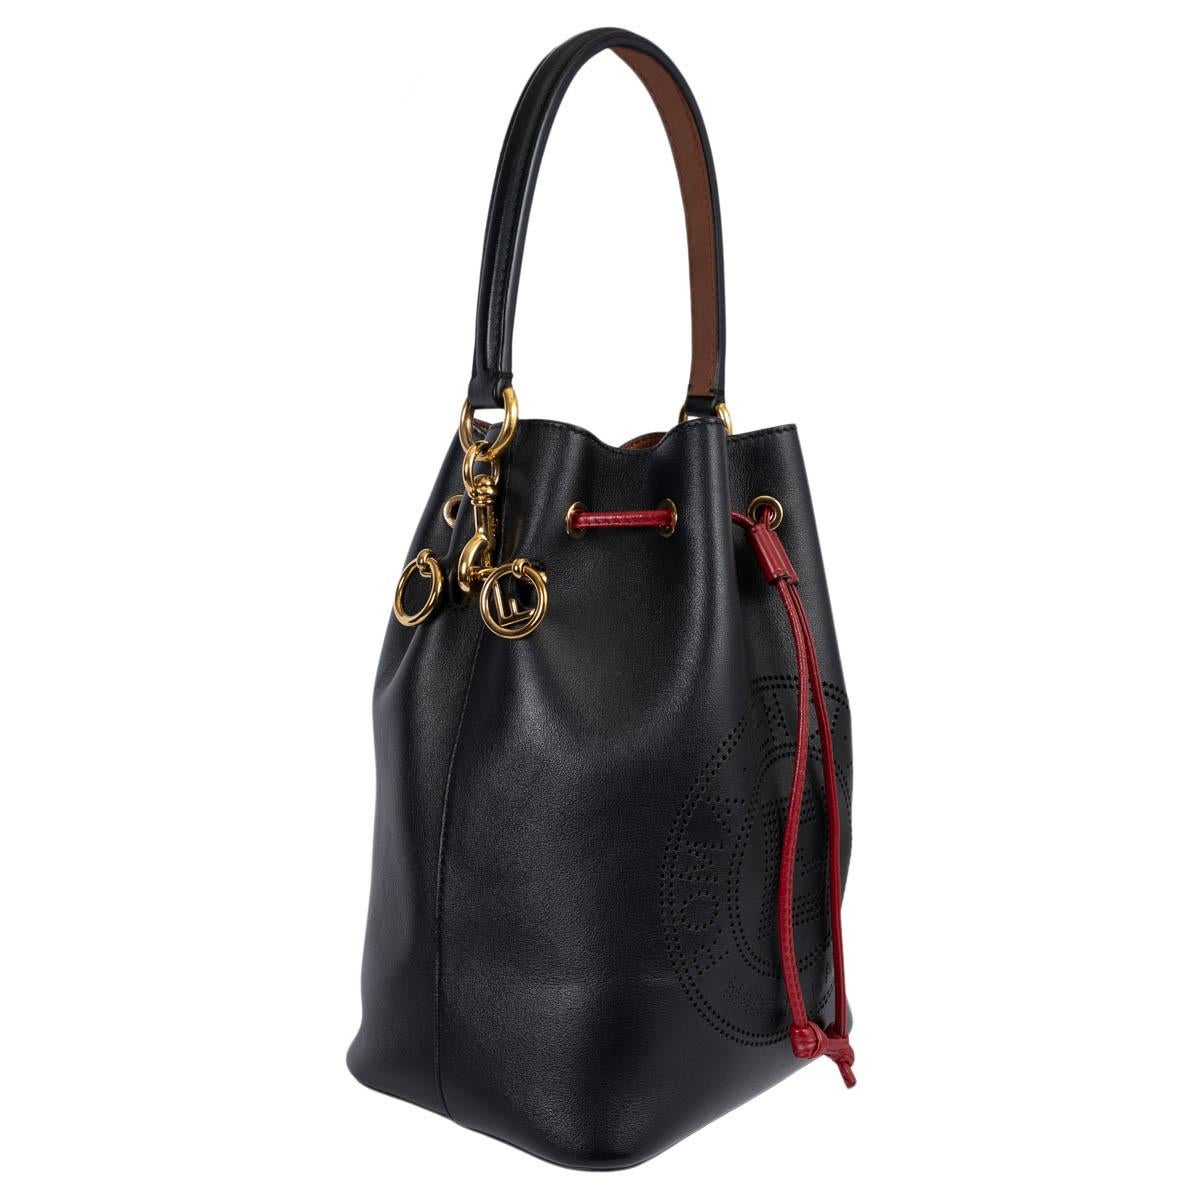 100% authentic Fendi Small Mon Tresor bucket bag in black Vitello Grace smooth calfskin with red drawstring and brown/black shoulder strap. Featuring perforated F is Fendi patch, two detachable shoulder straps, one long and one short, to wear the